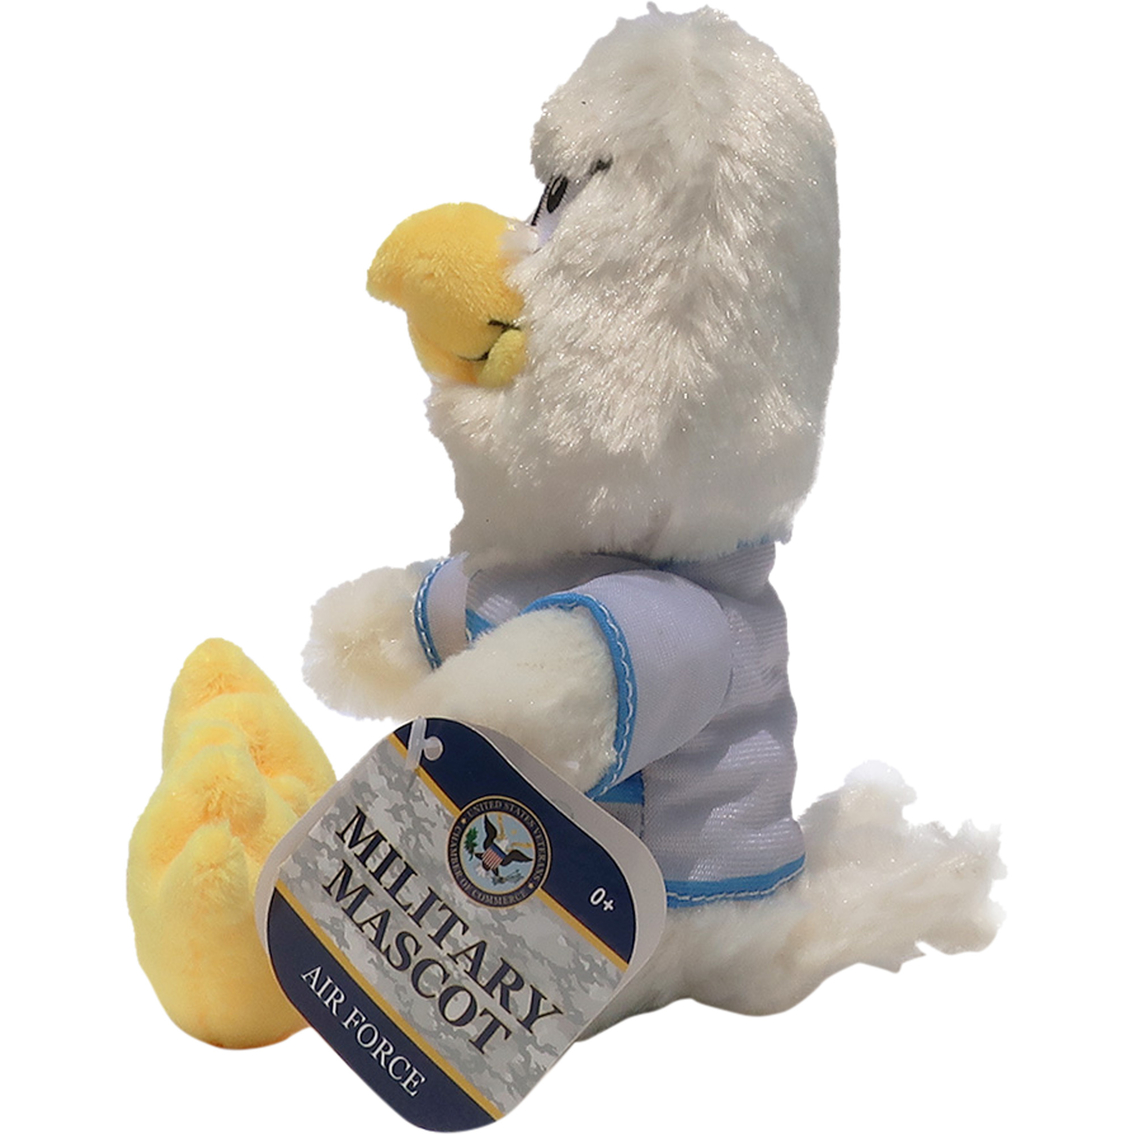 TLJ Marketing & Sales Plush 6 in. Military Mascots - Image 3 of 4